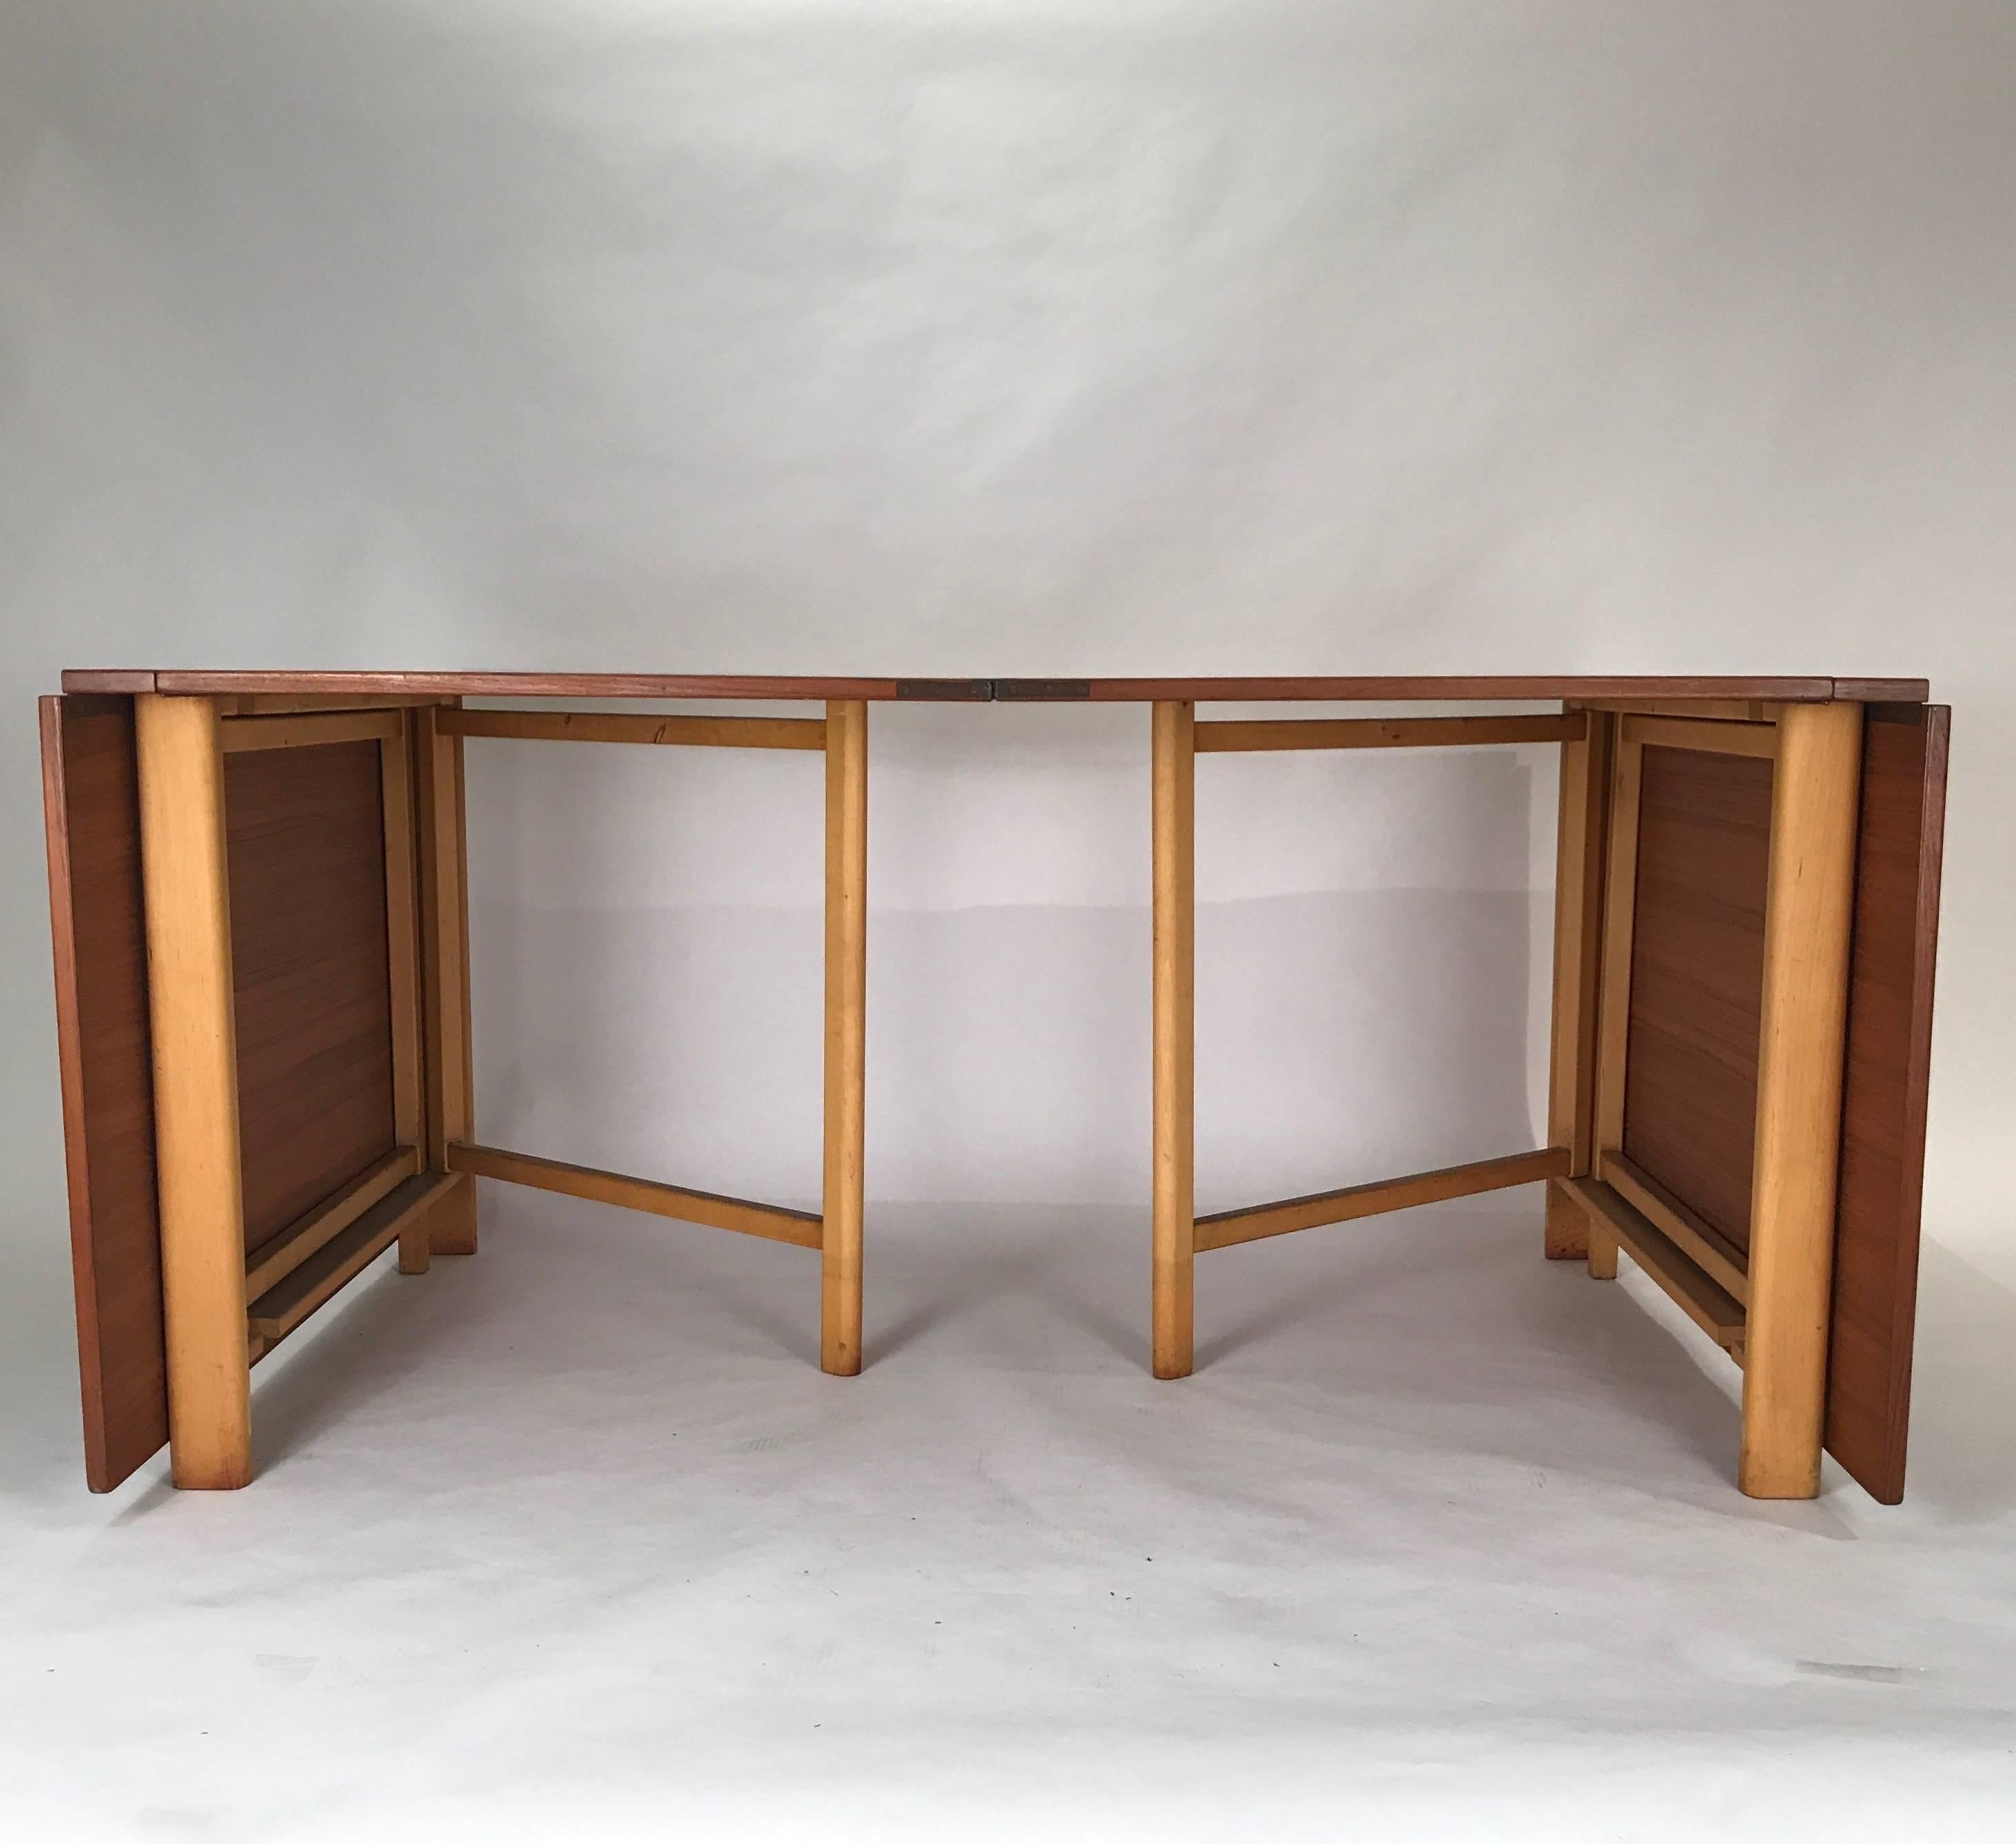 Fantastic drop leaf and accordion fold extension table designed by Bruno Mathsson for Karl Mathsson. This is the wider version of this table that was produced. Made in Sweden. Teak top with gorgeous beech legs.
Fully extended is 110